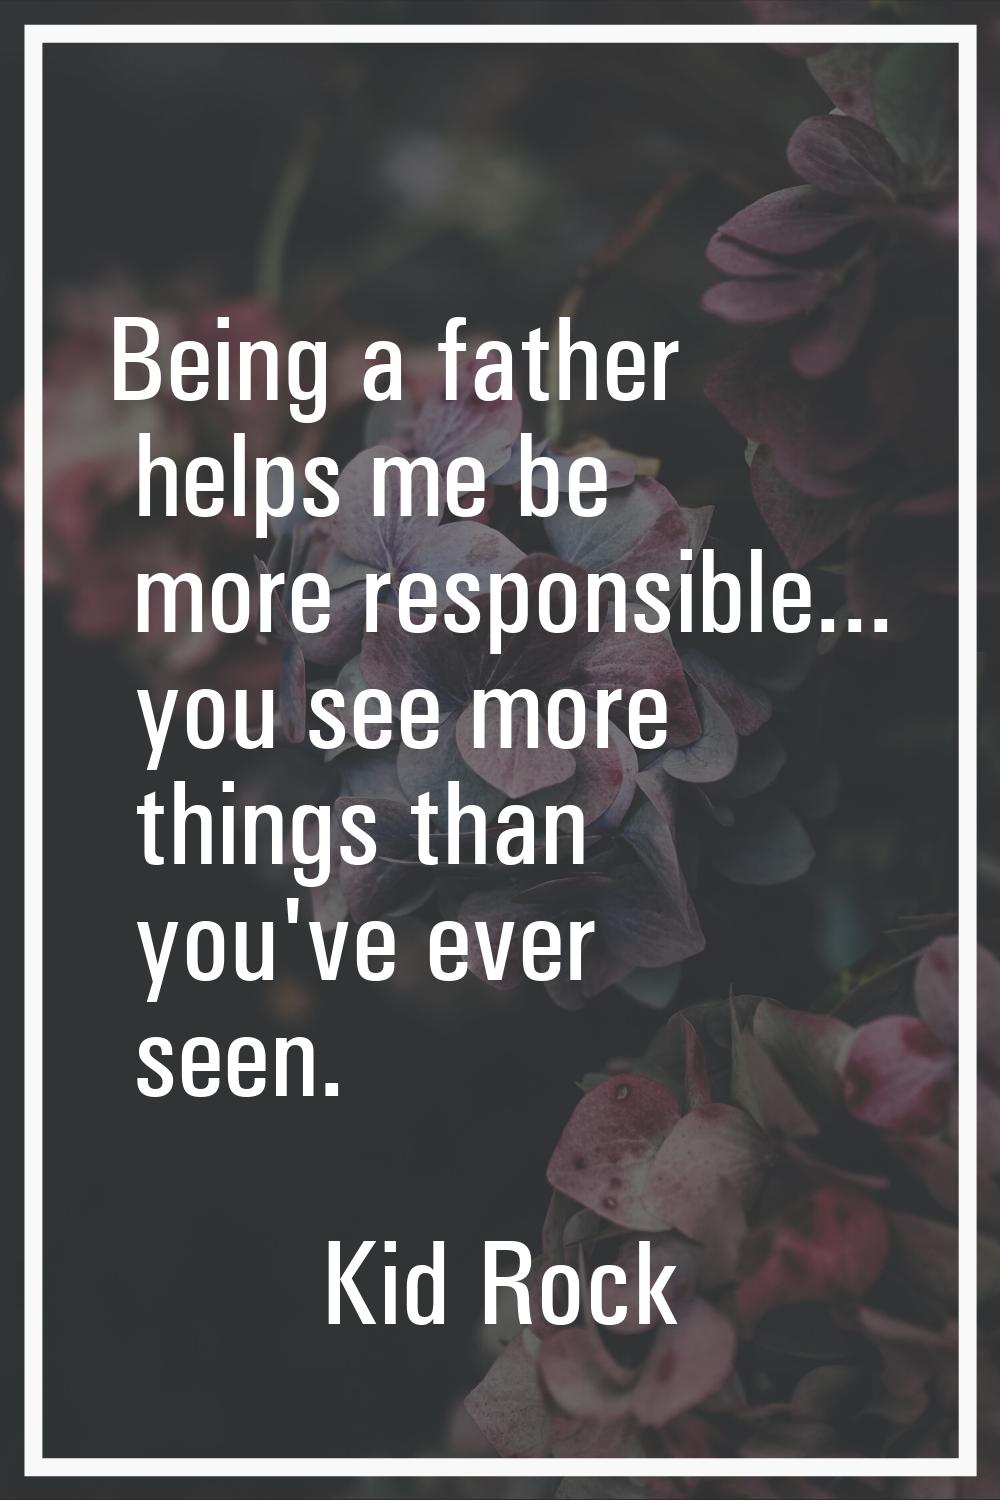 Being a father helps me be more responsible... you see more things than you've ever seen.